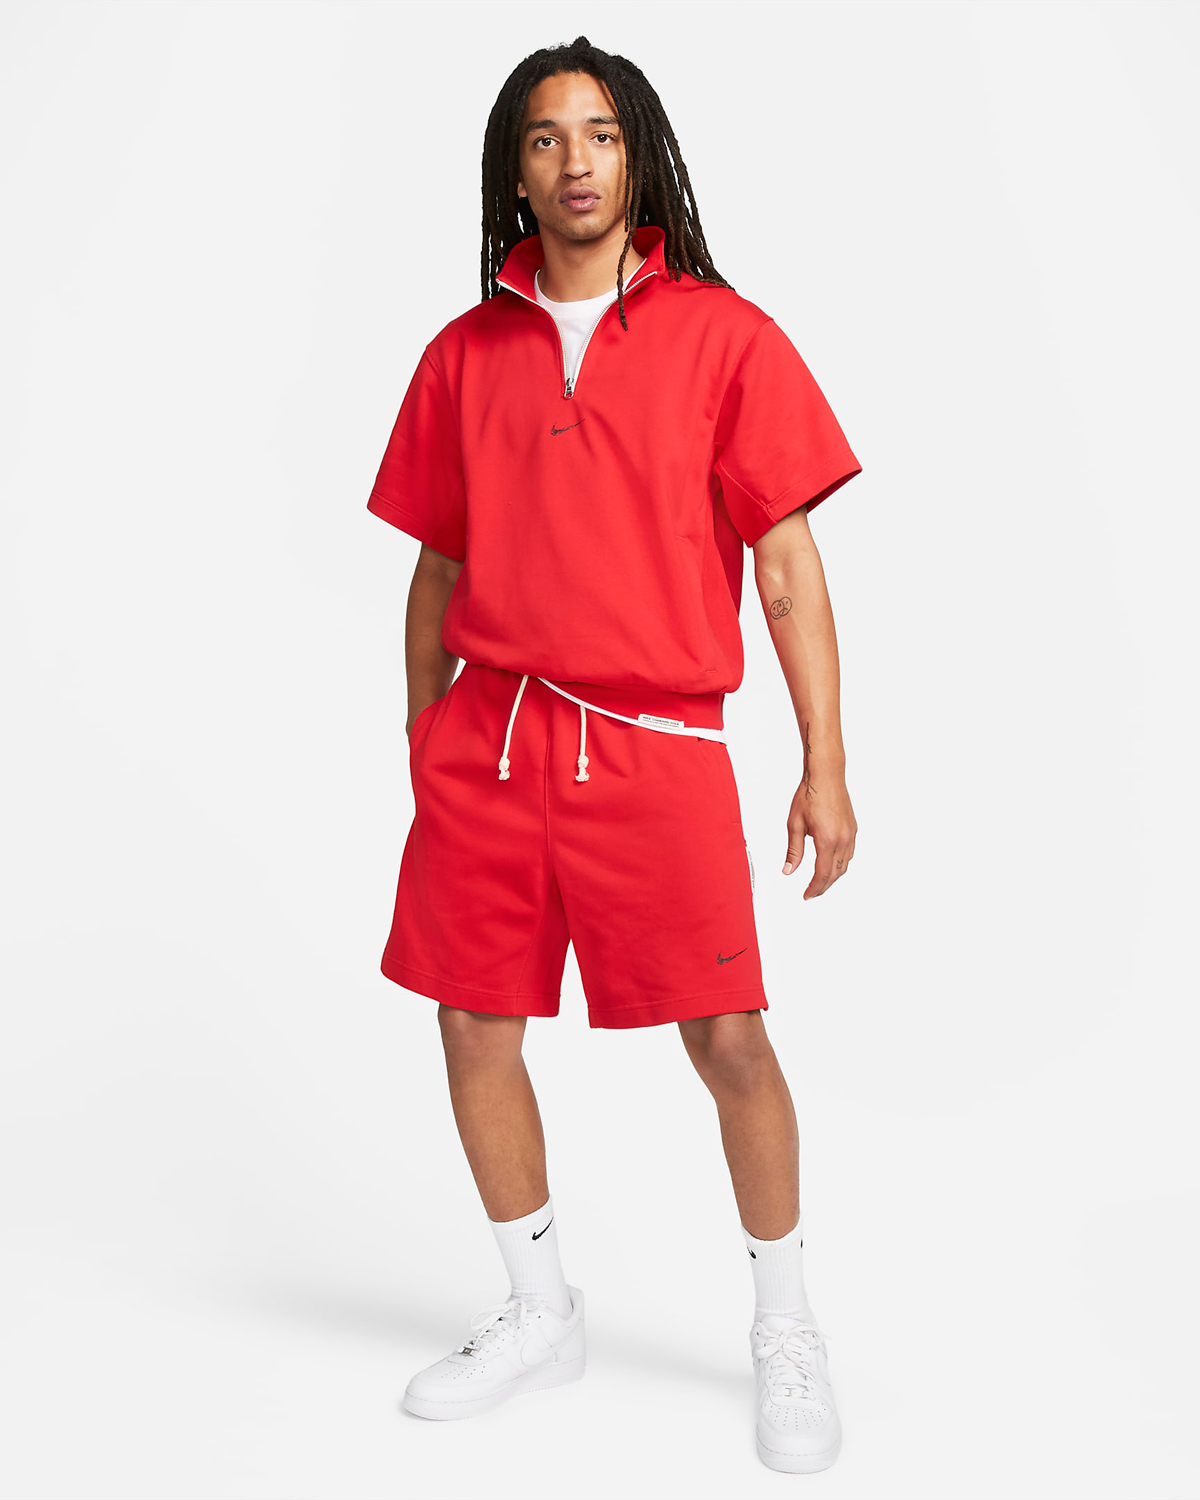 Nike-Park-Fleece-Shorts-University-Red-Outfit